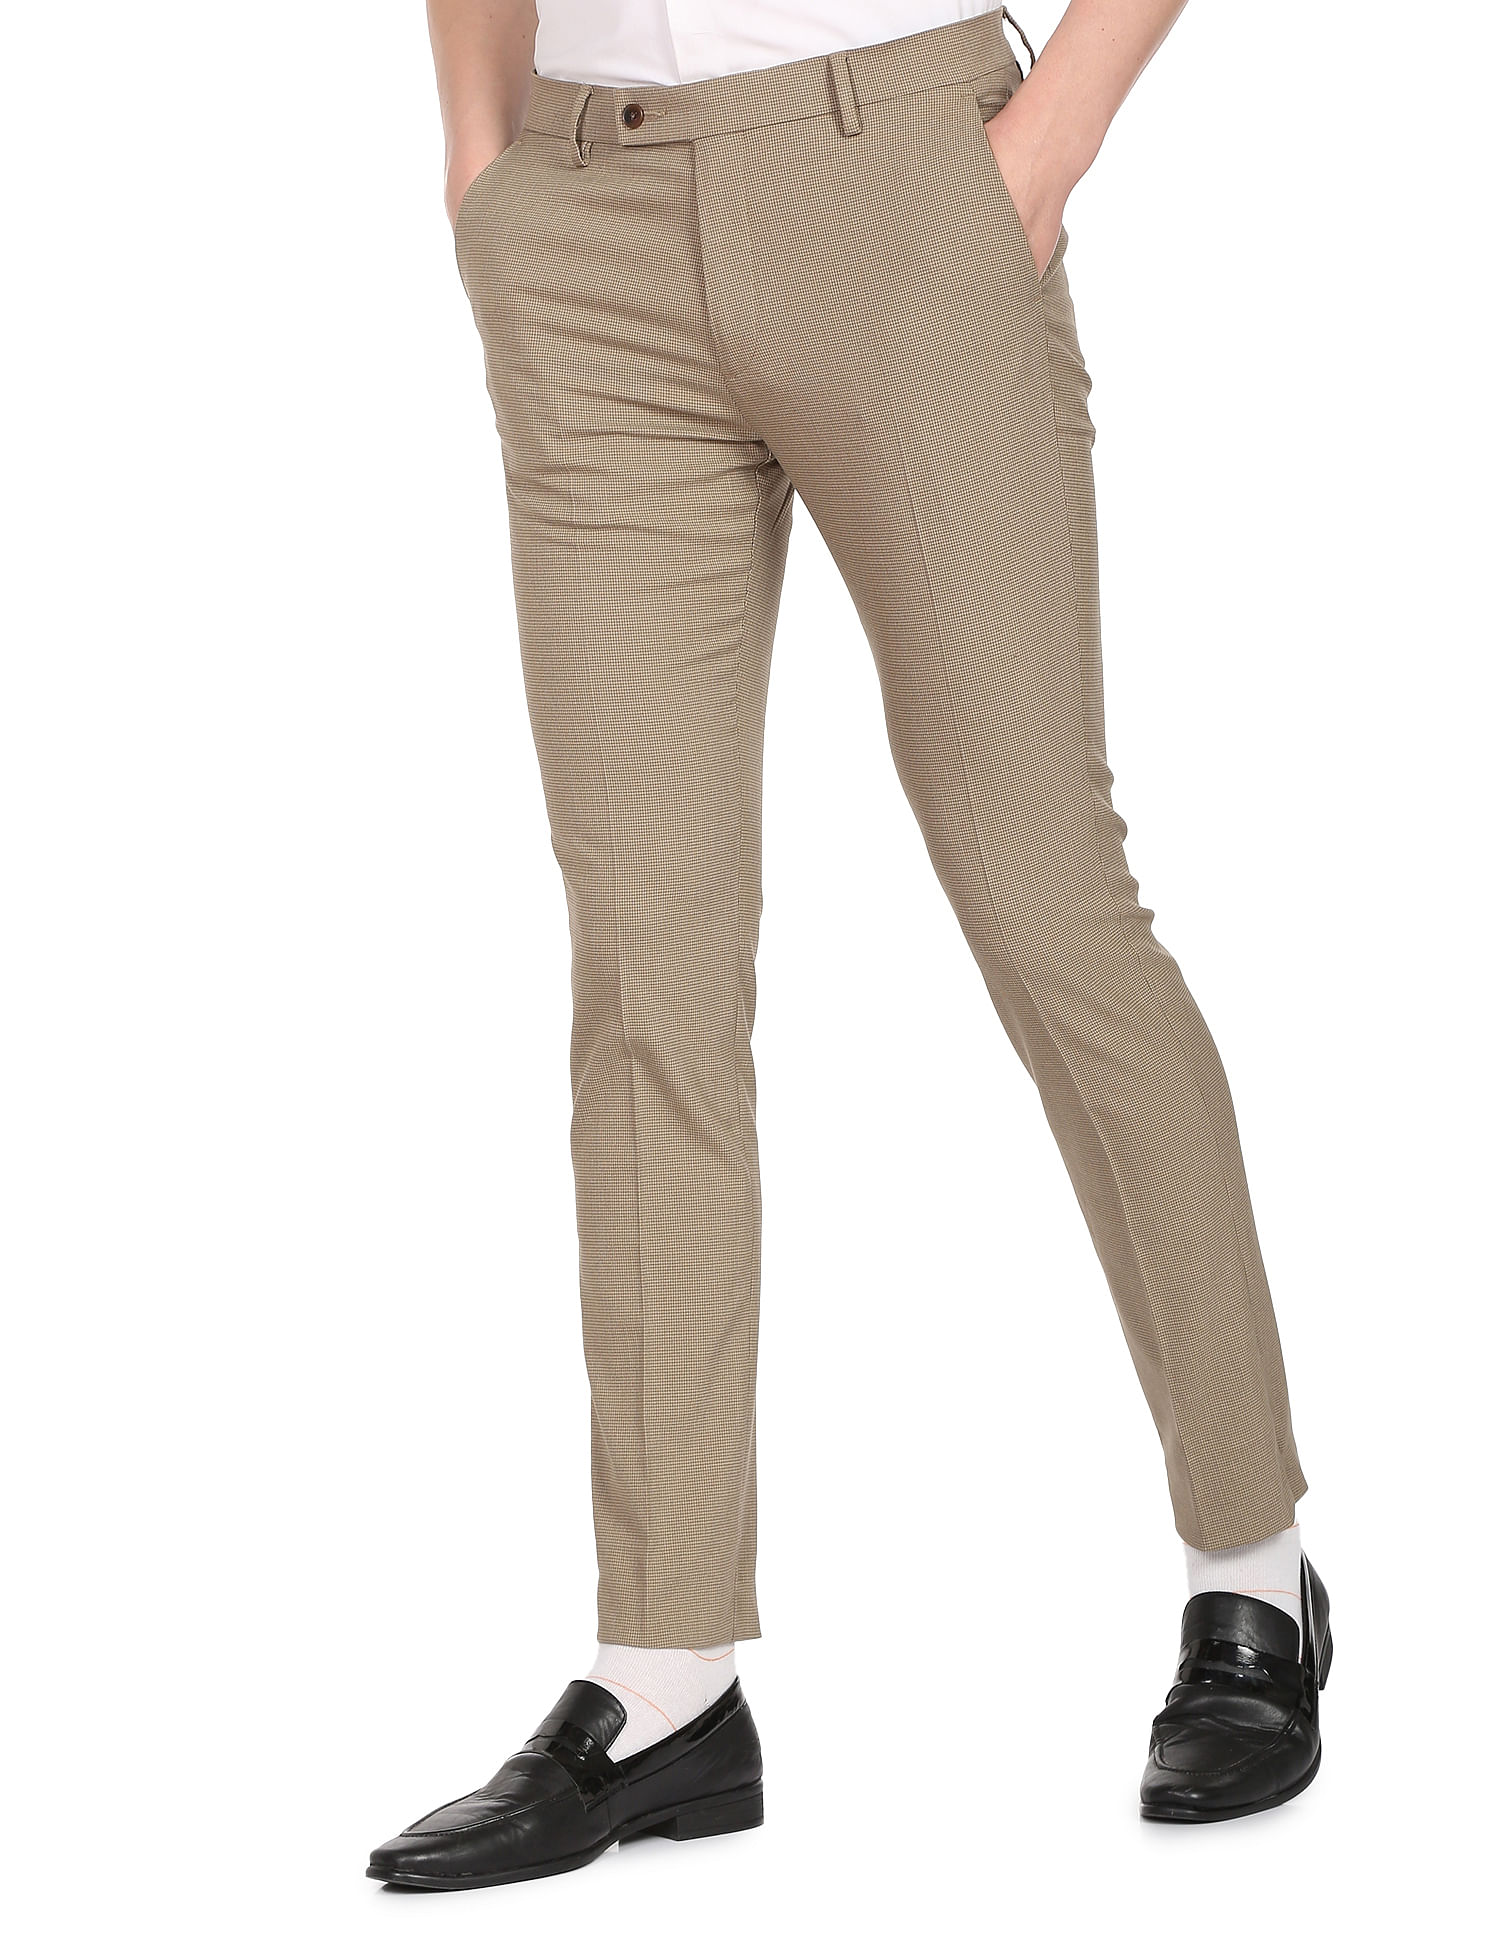 Black Shapes Slim Fit Micro Check Trousers Color